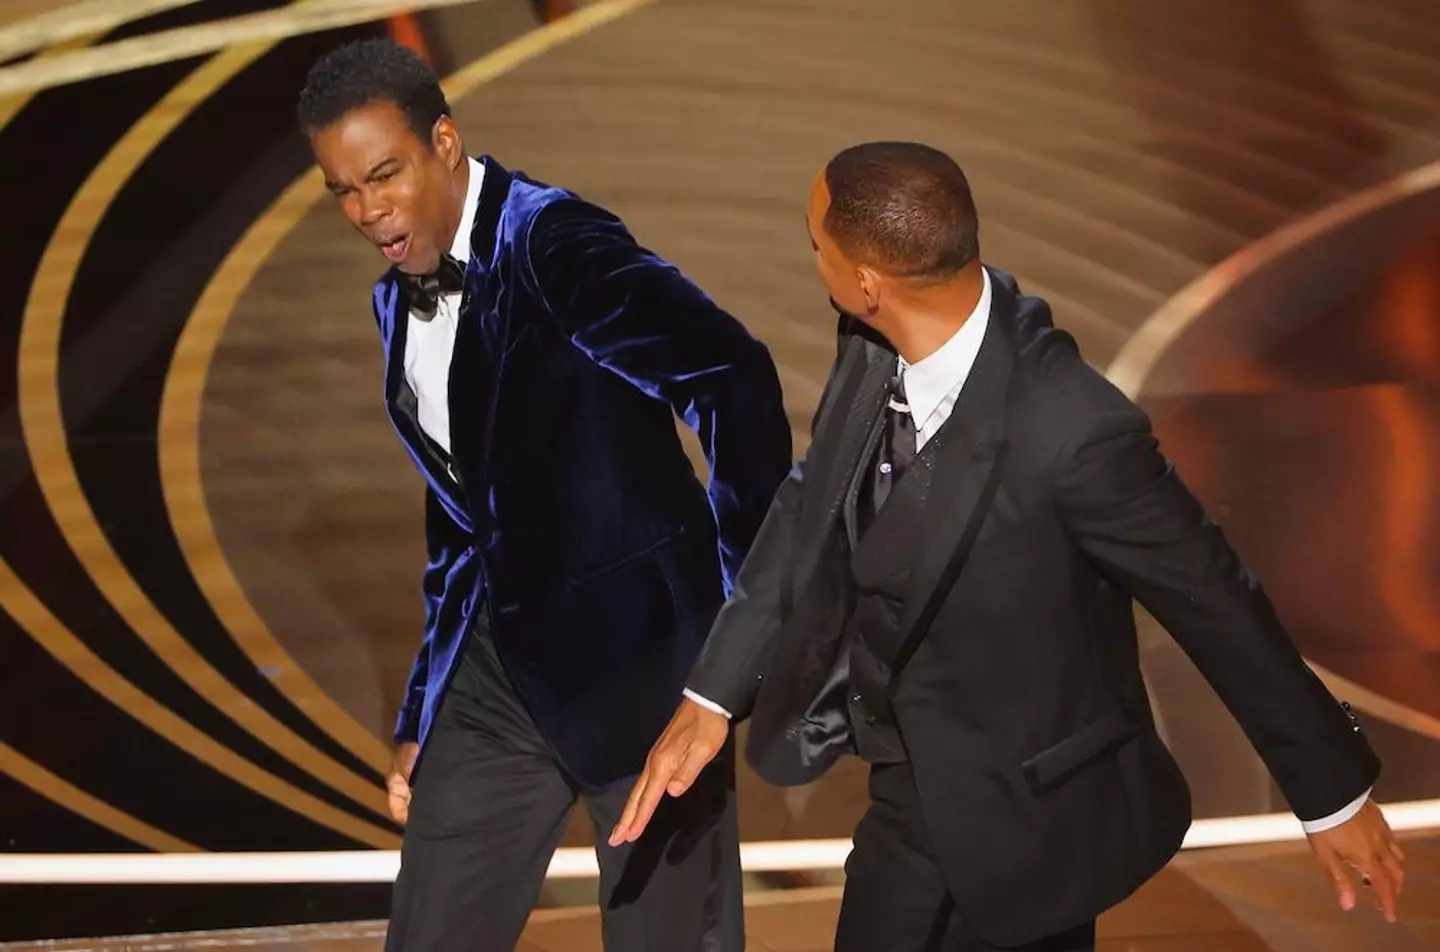 Will Smith slapped Chris Rock at this year's Oscars.